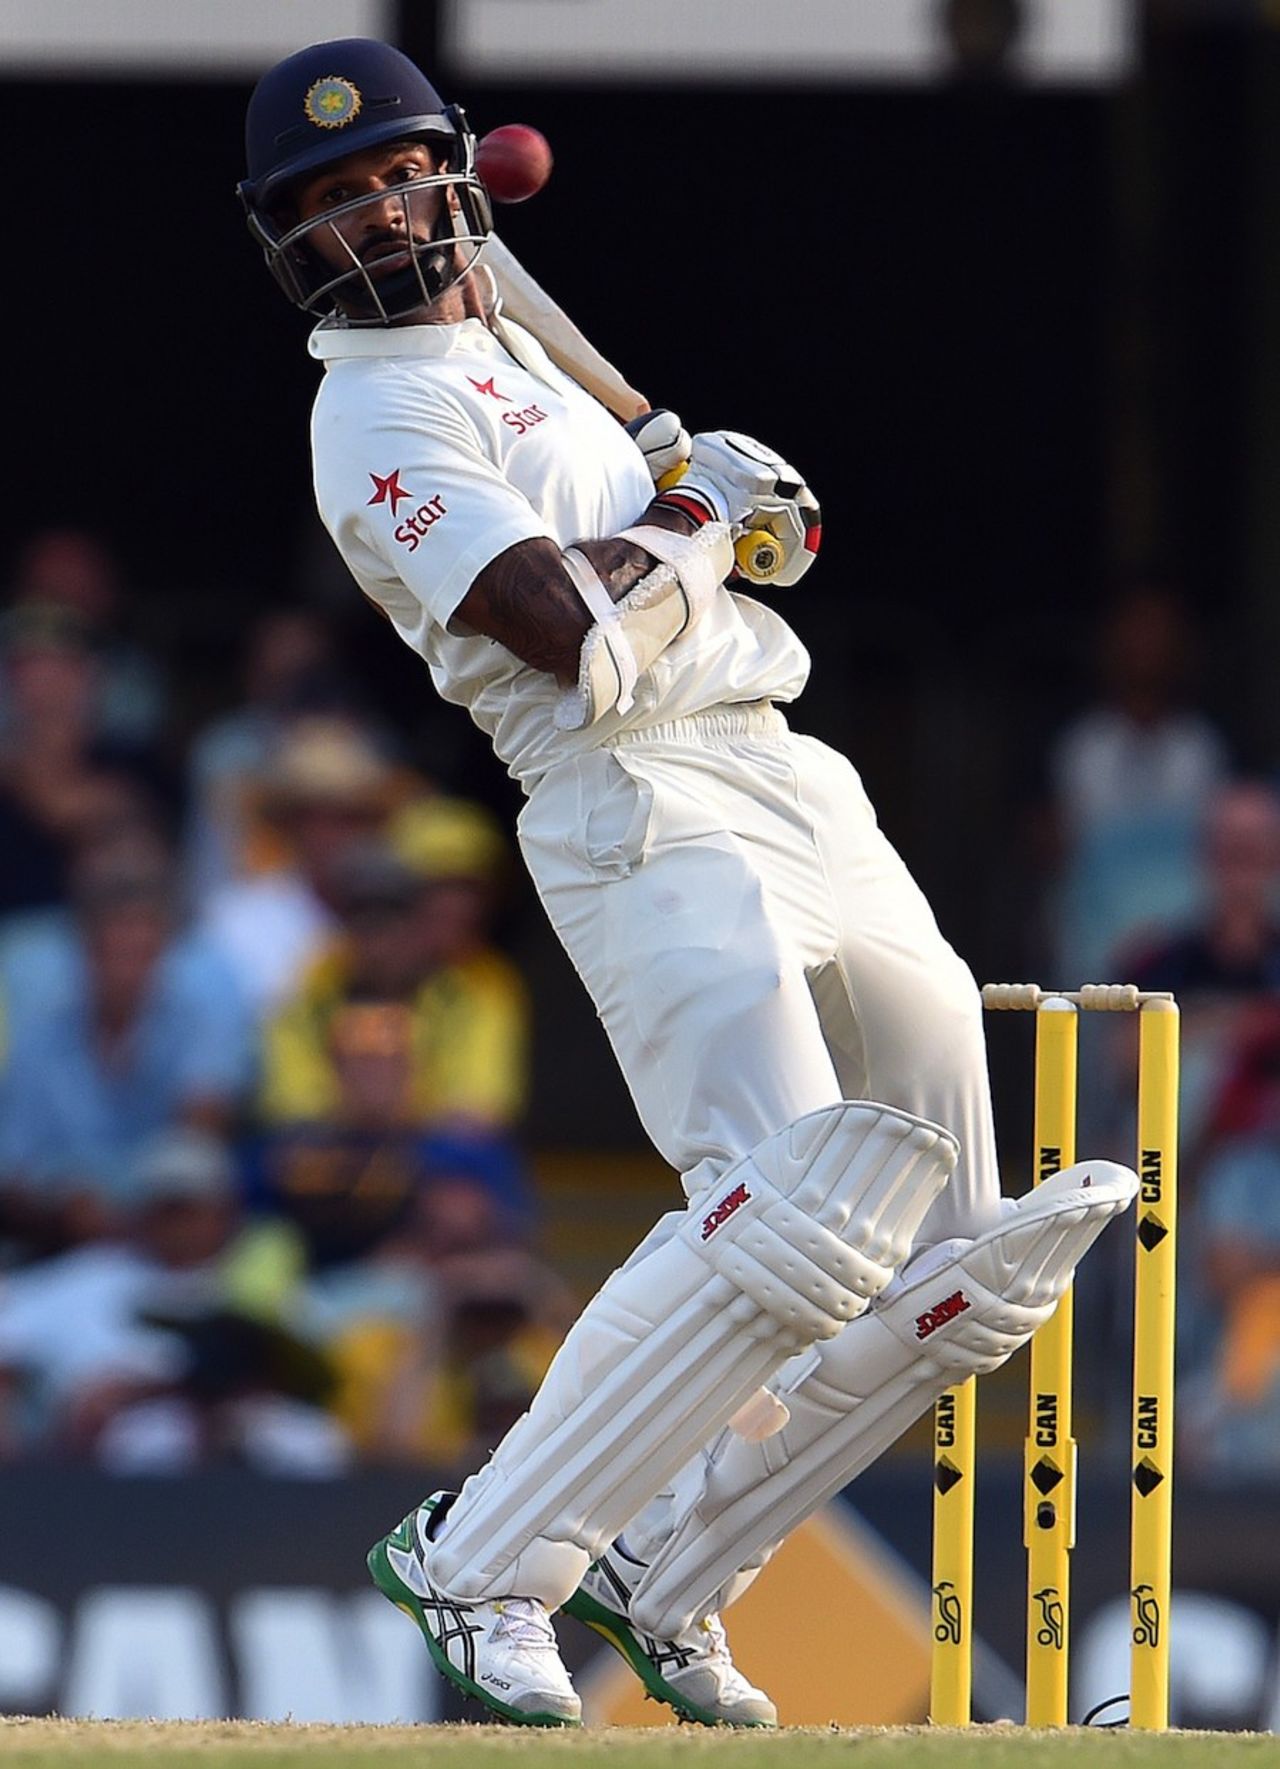 Shikhar Dhawan sways out of the line, Australia v India, 2nd Test, Brisbane, 3rd day, December 19, 2014